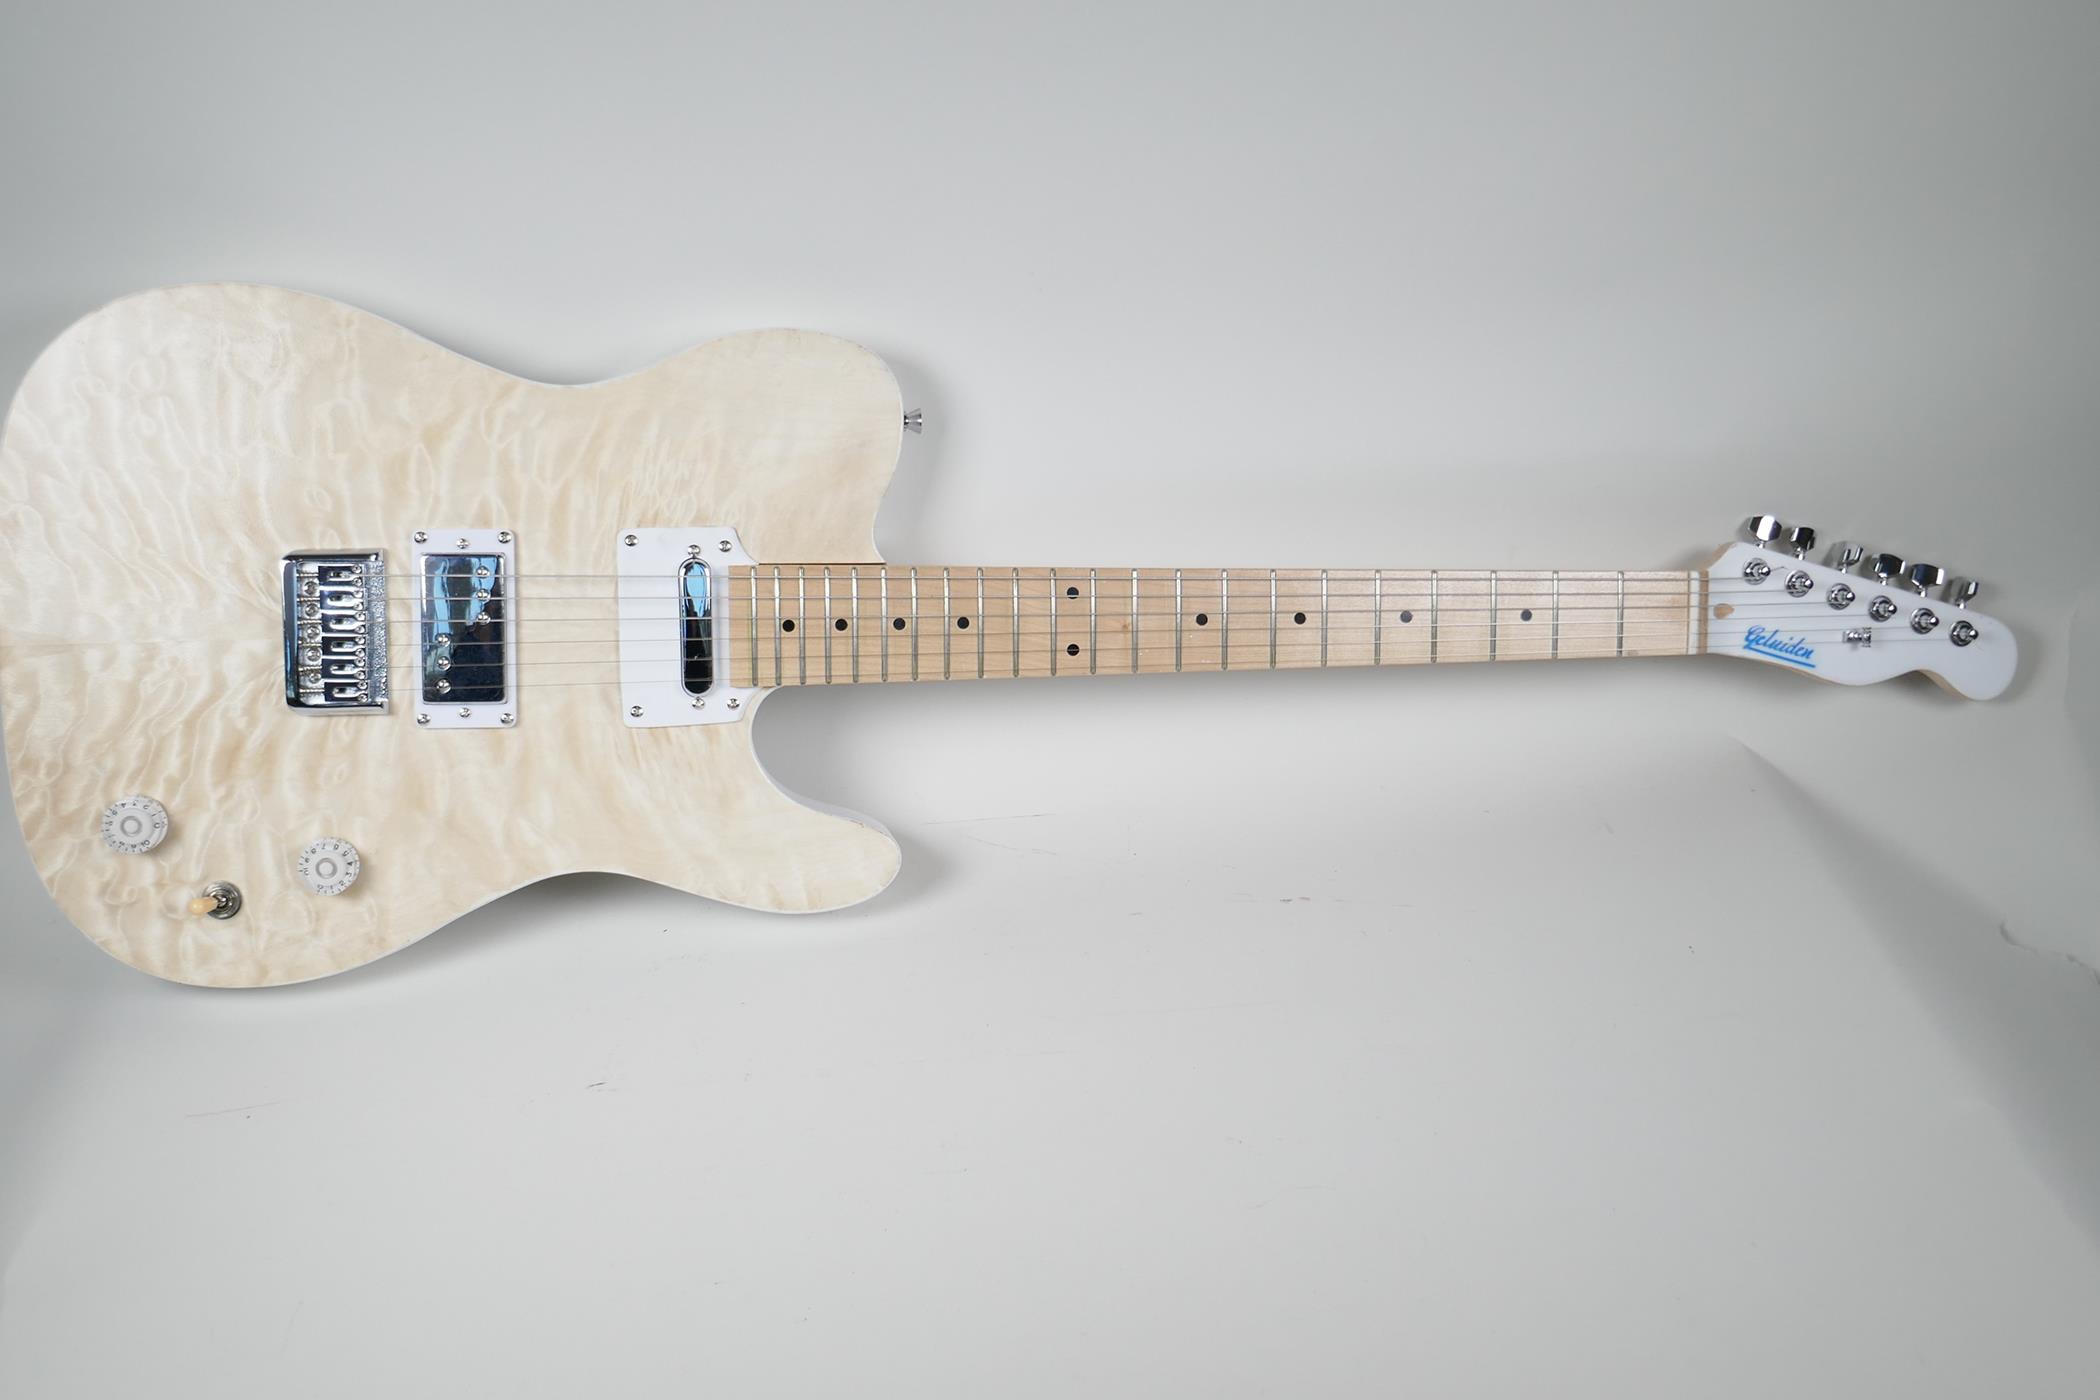 An electric guitar in the style of a Fender with blonde maple veneered body, the head bears label